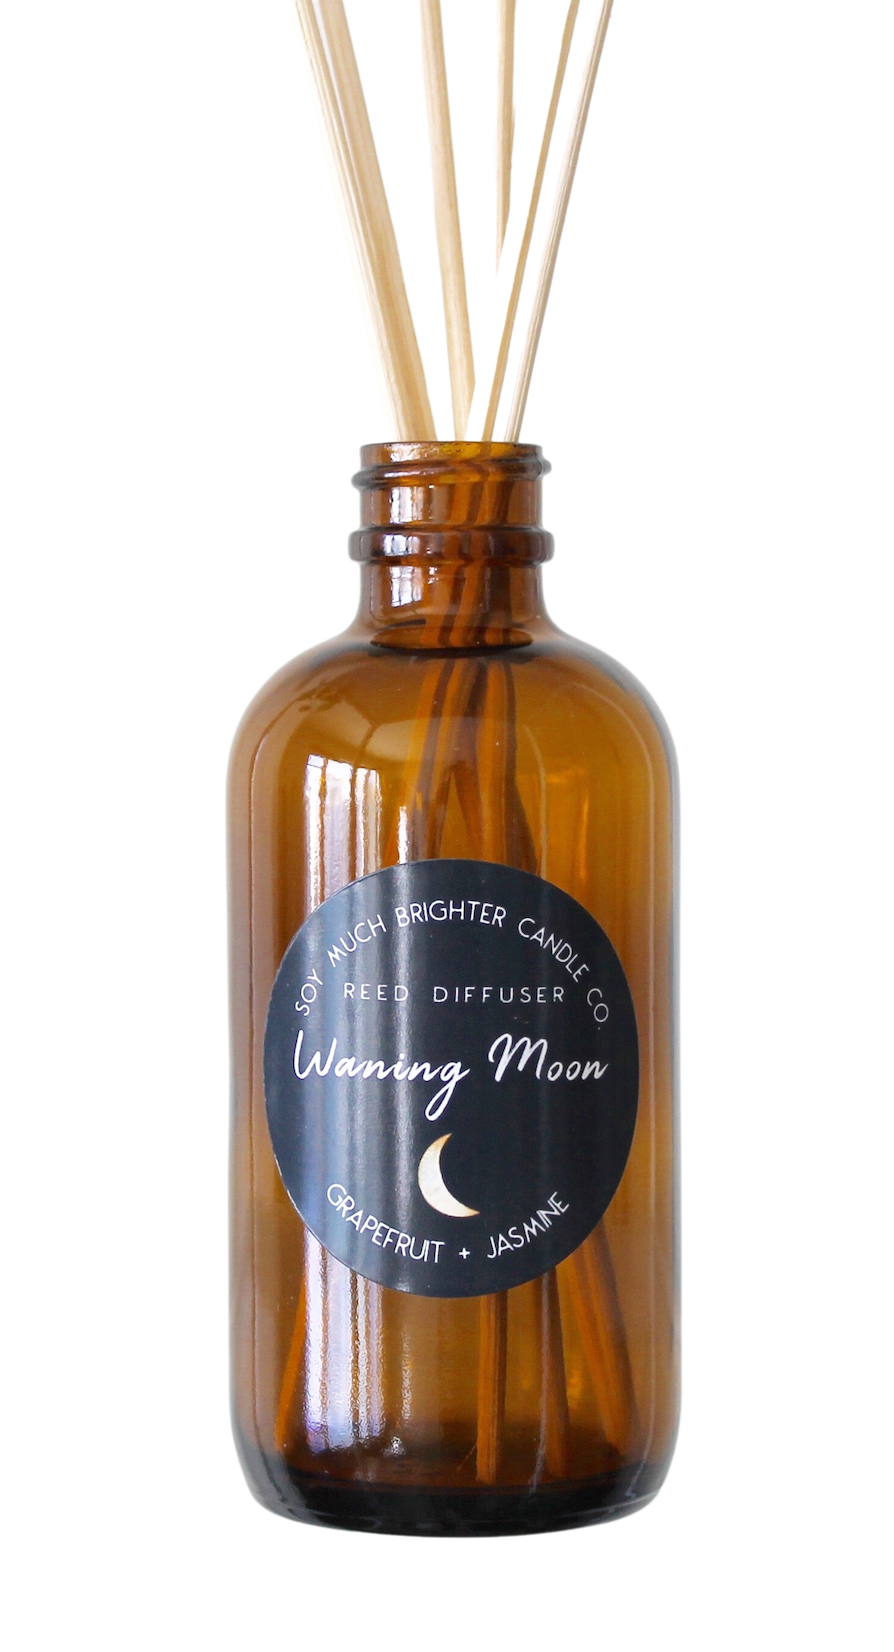 Reed Diffuser: Moon Phase Collection - Waning Moon // Grapefruit + Jasmine